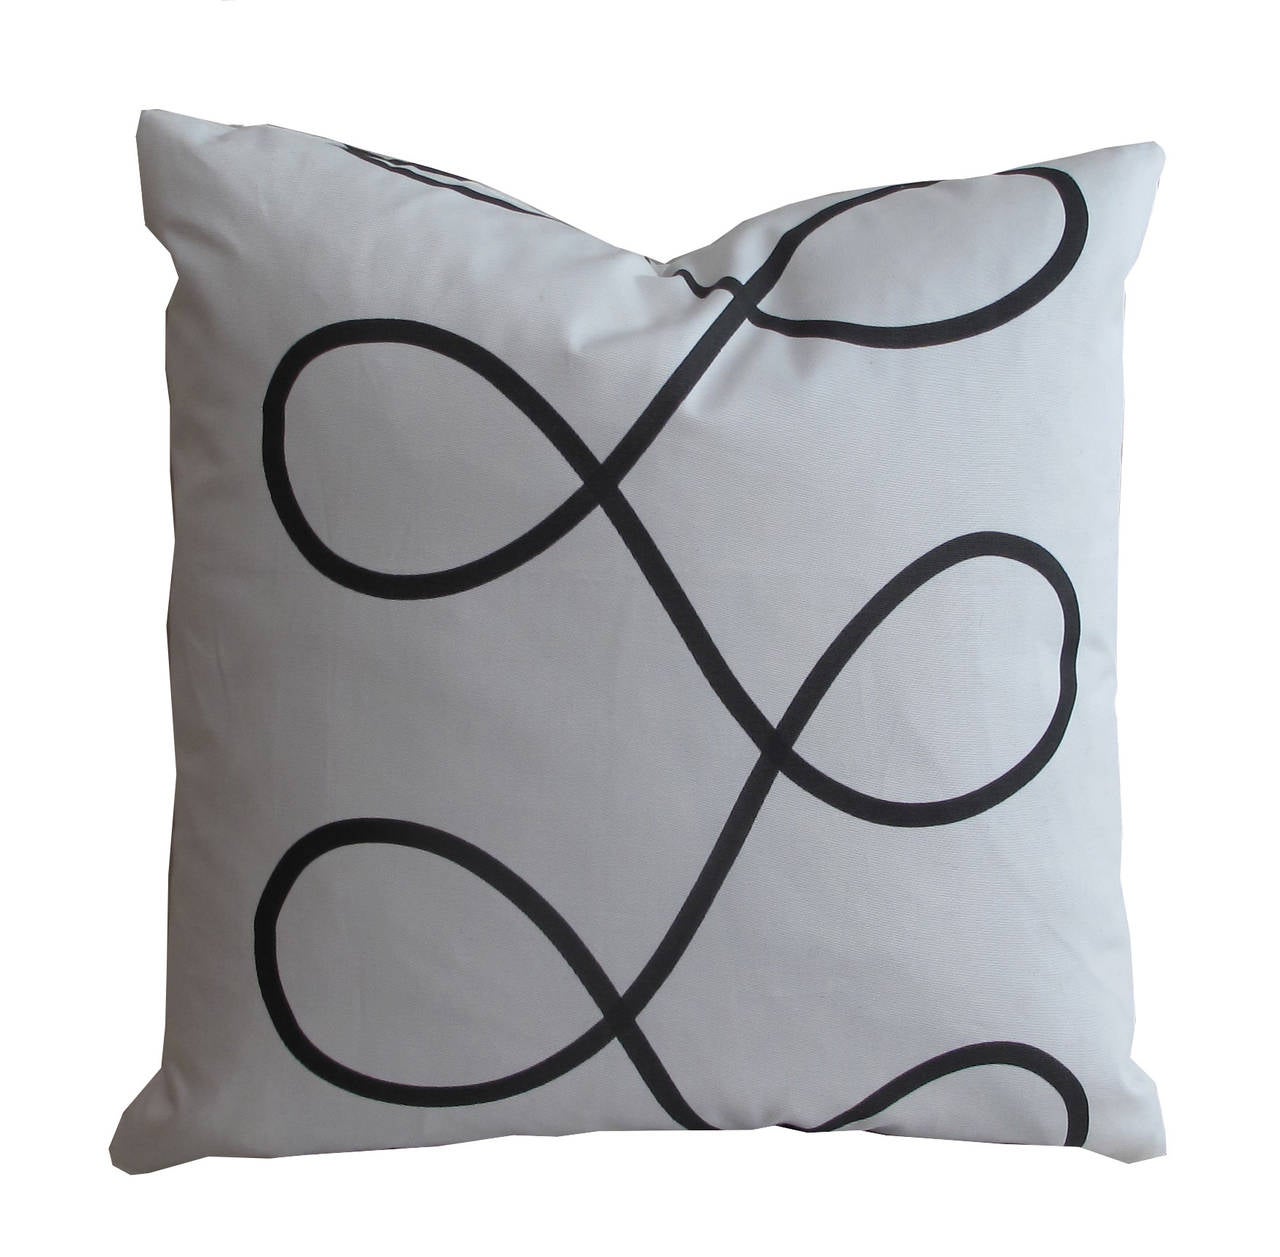 Custom black and white ribbon hand-painted Livio de Simone pillow. Pair available, sold individually.